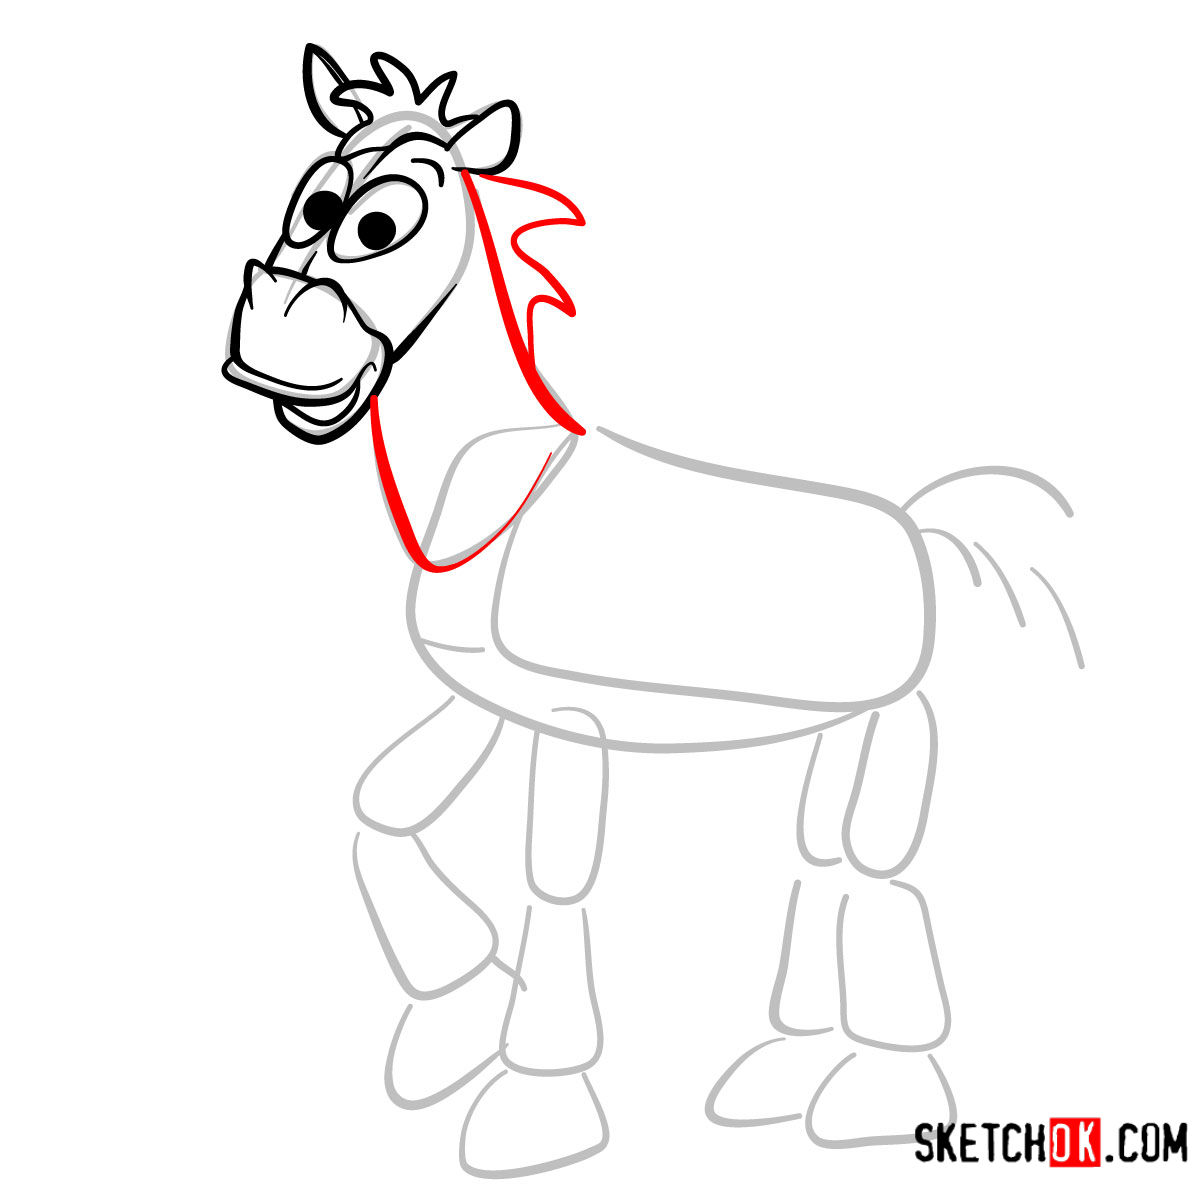 How to draw Bullseye from Toy Story - step 05